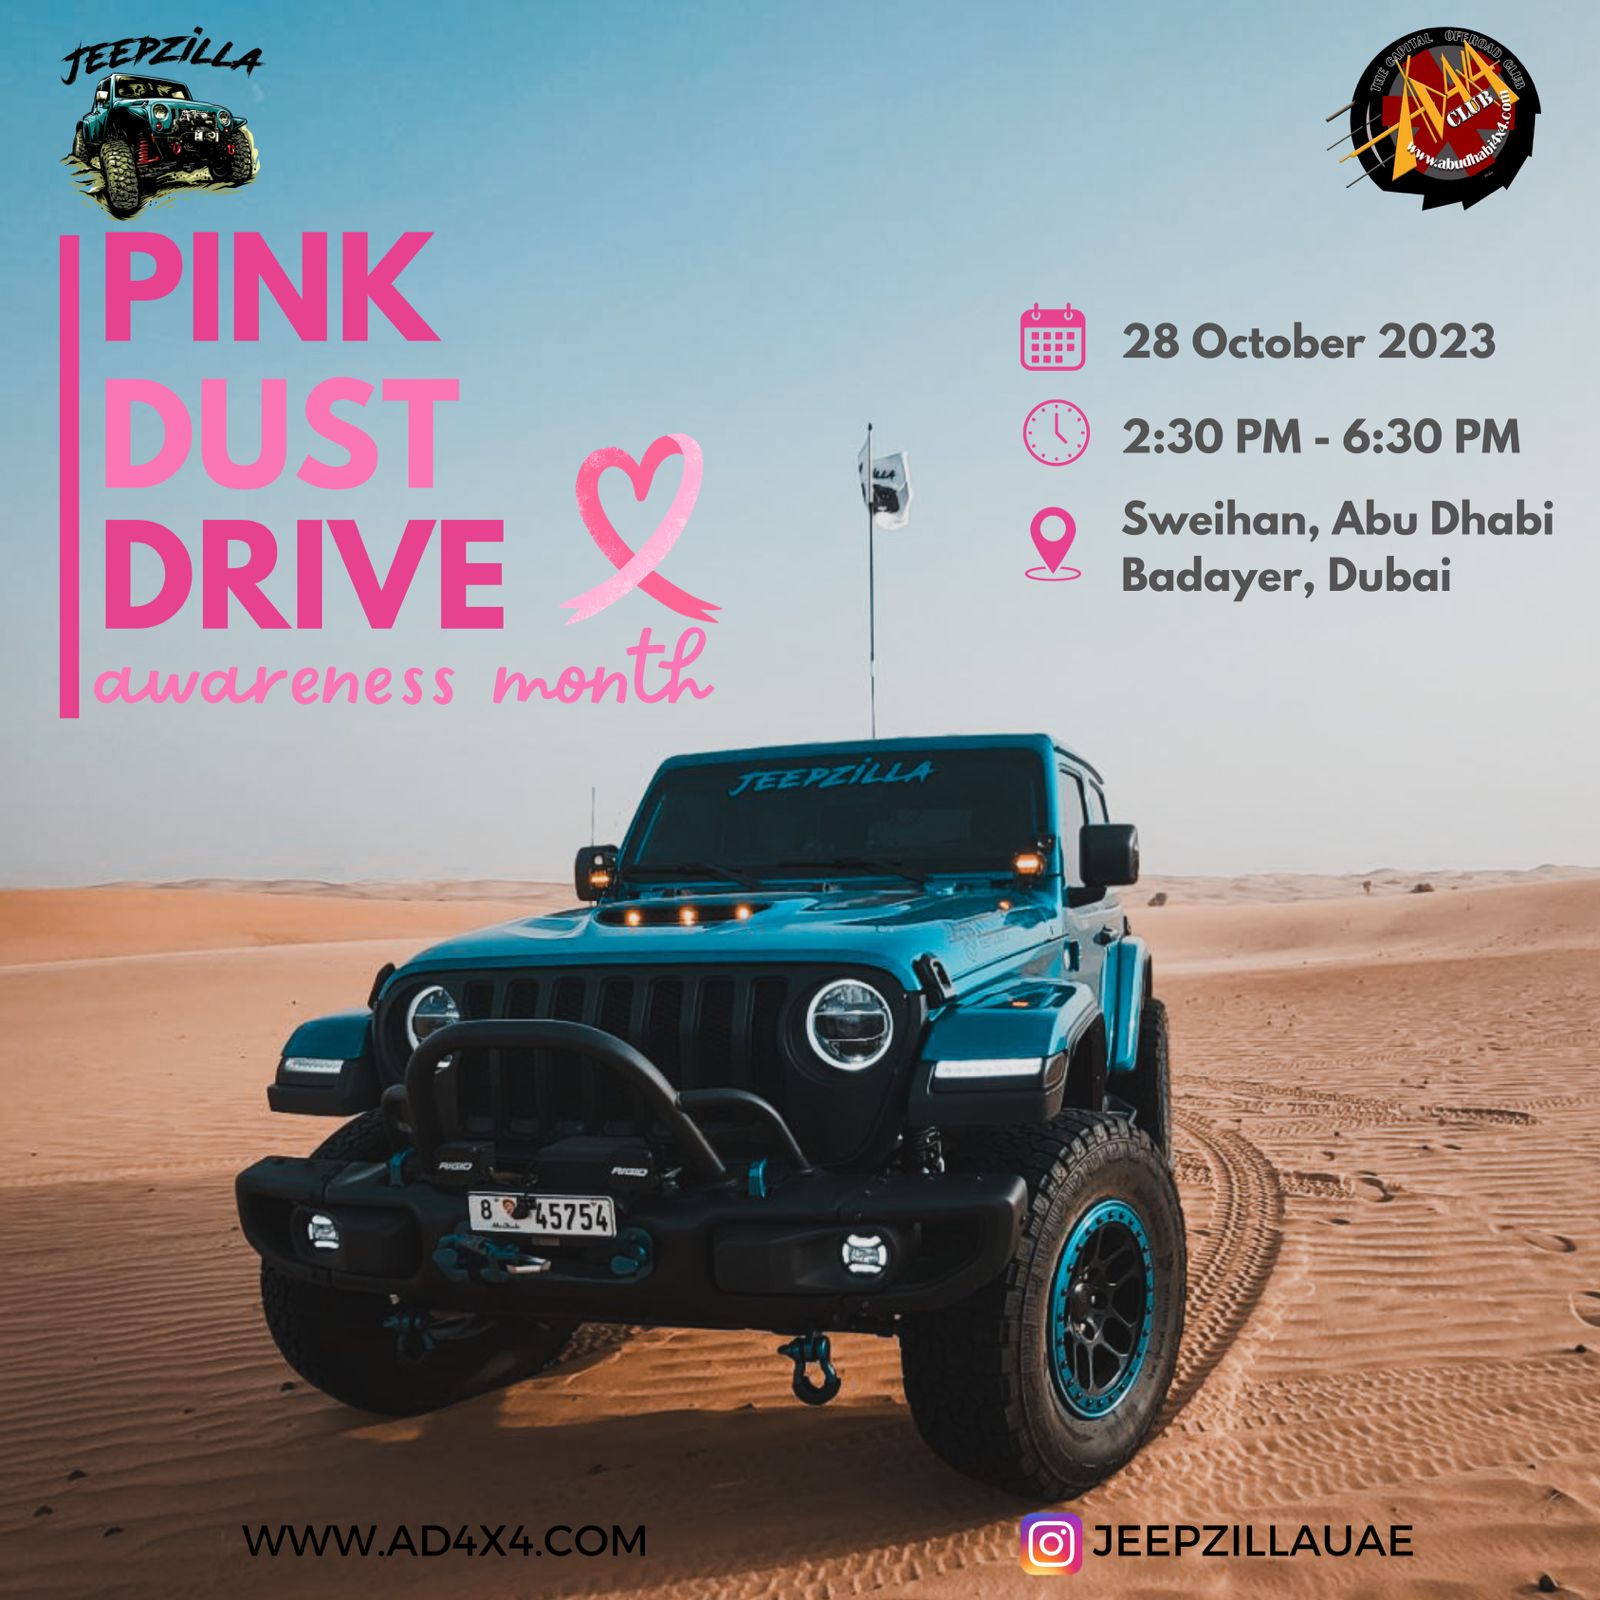 AUH PINK DUST DRIVE WITH JEEPZILLA 